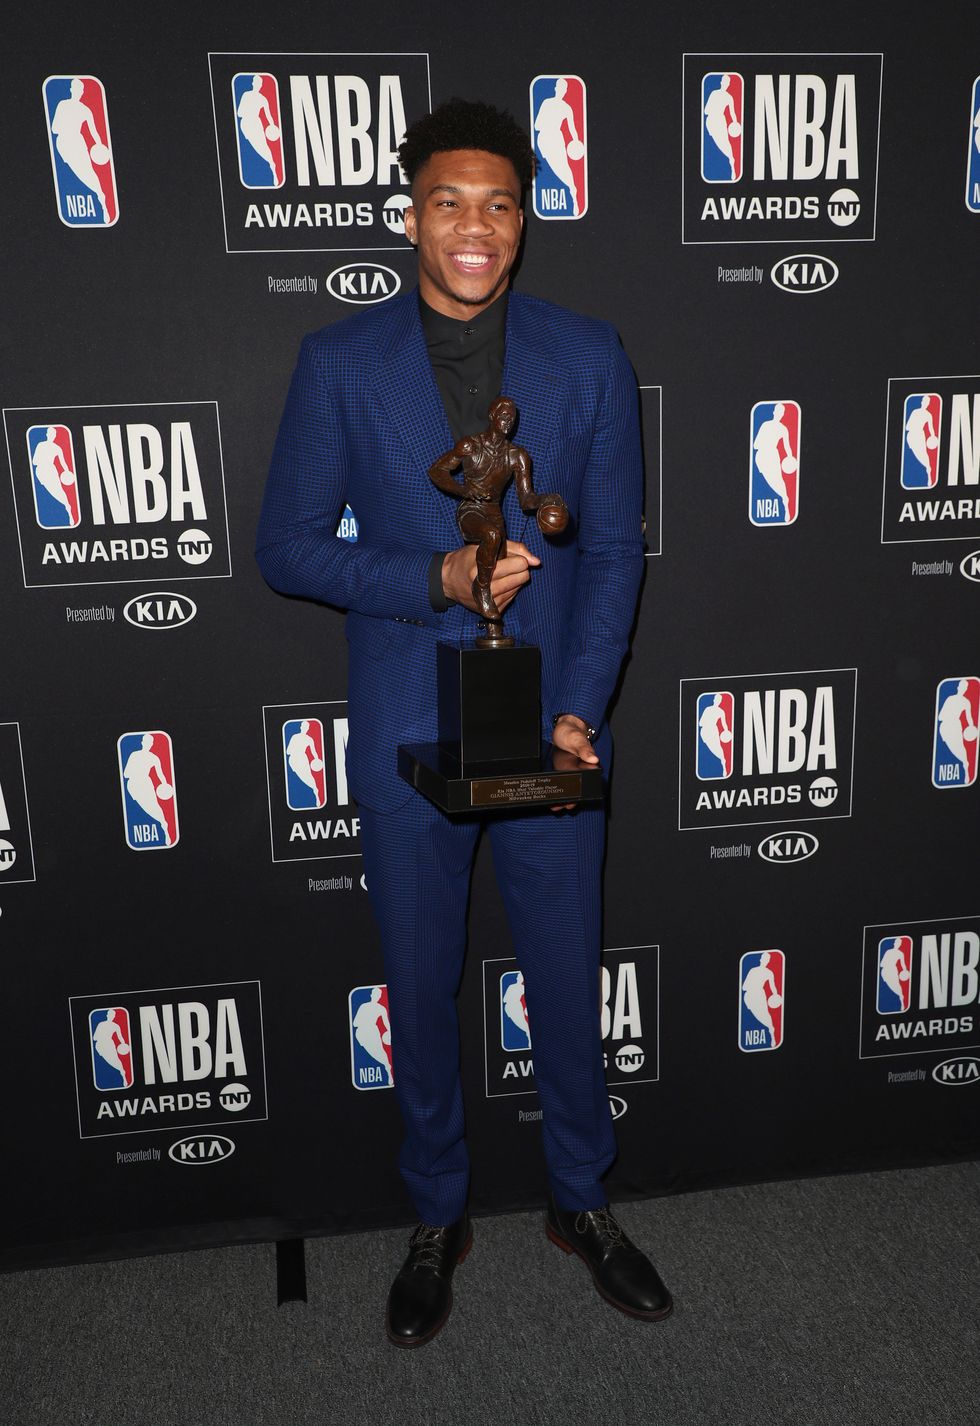 Giannis Antetokounmpo Named 'Most Valuable Player' at 2019 NBA Awards